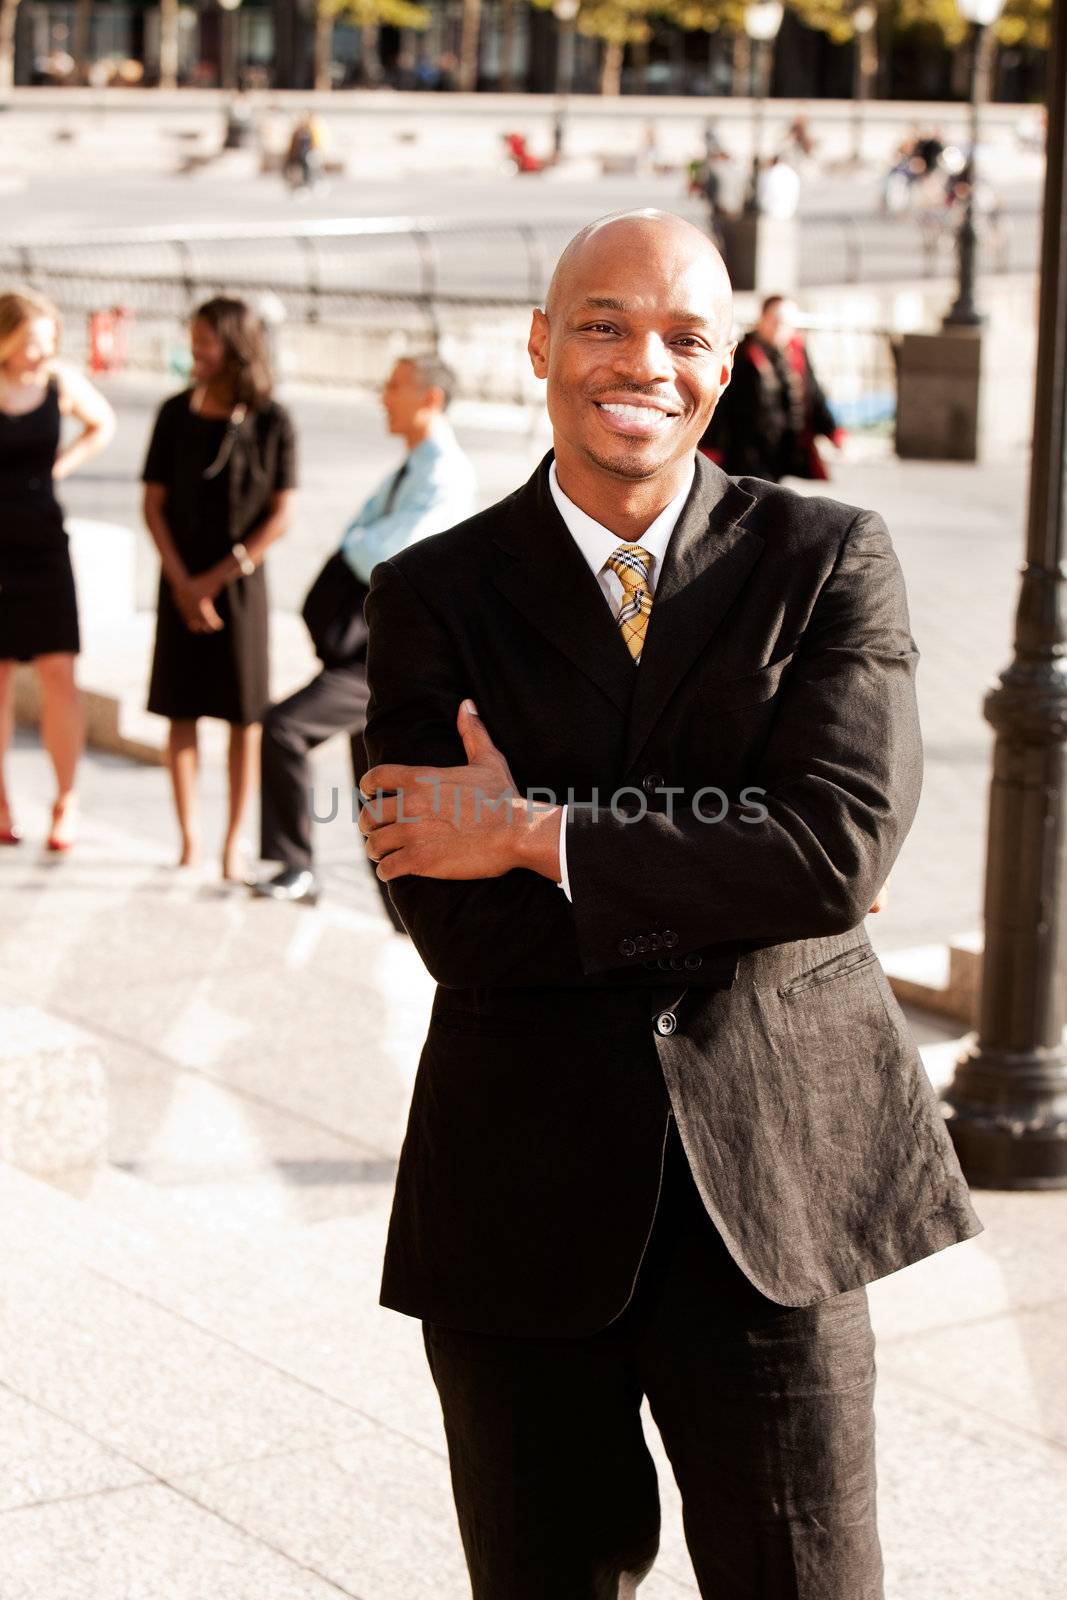 A portrait of a happy African American Business Man outdoors